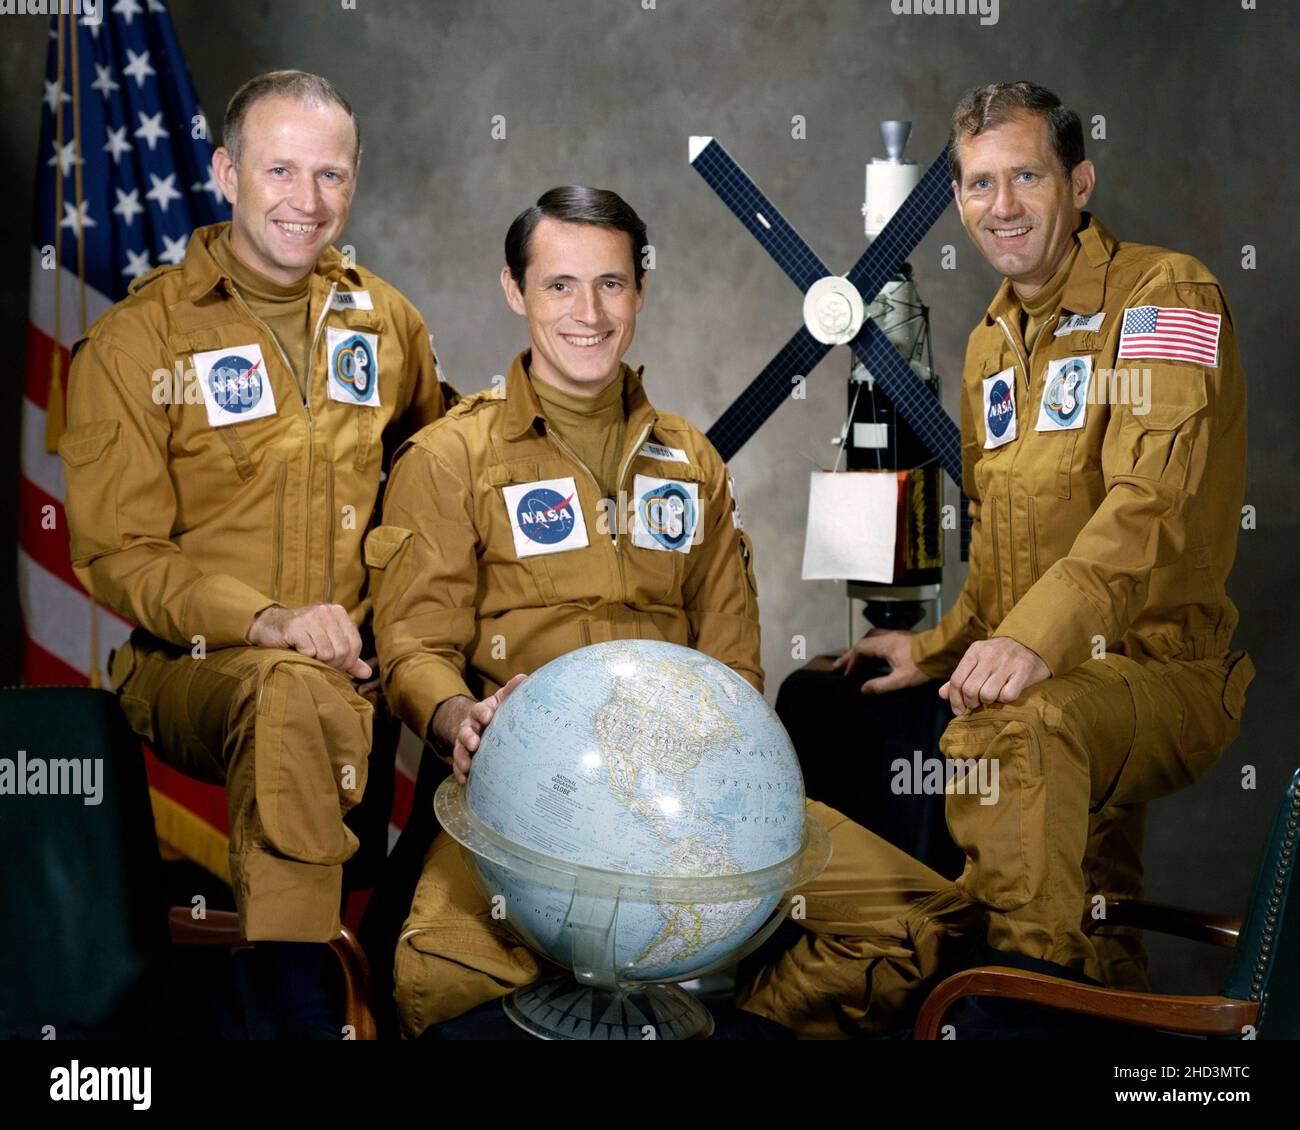 (August 1973) --- These three men are the prime crewmen for the Skylab 4 mission. Pictured in their flight suits with a globe and a model of the Skylab space station are, left to right, astronaut Gerald P. Carr, commander; scientist-astronaut Edward G. Gibson, science pilot; and astronaut William R. Pogue, pilot. Stock Photo